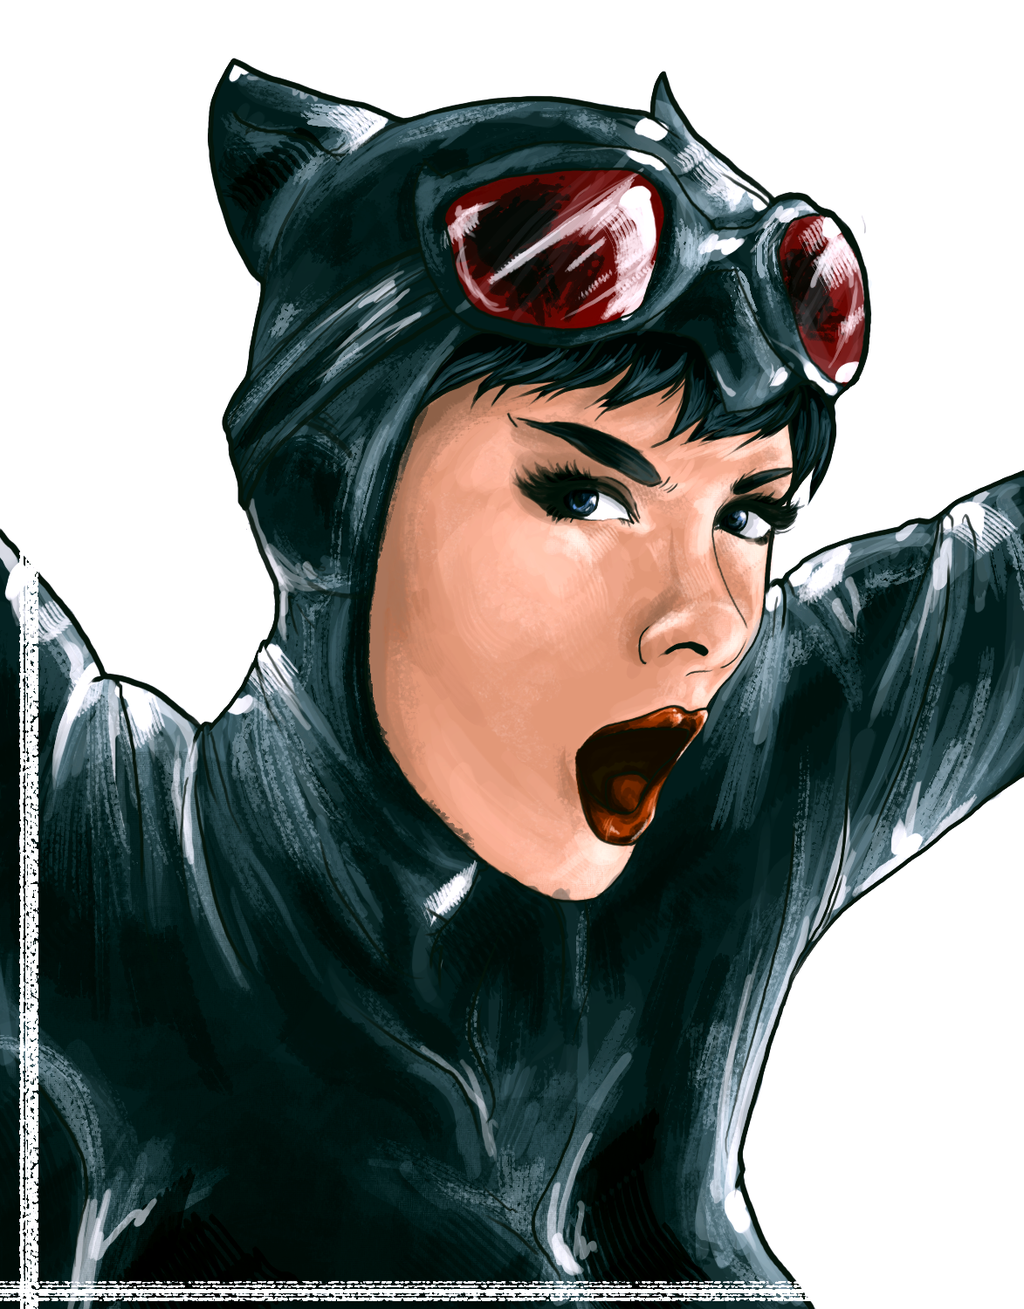 the_face_of_catwoman ah_by_kachumi-d3hj3km.png.